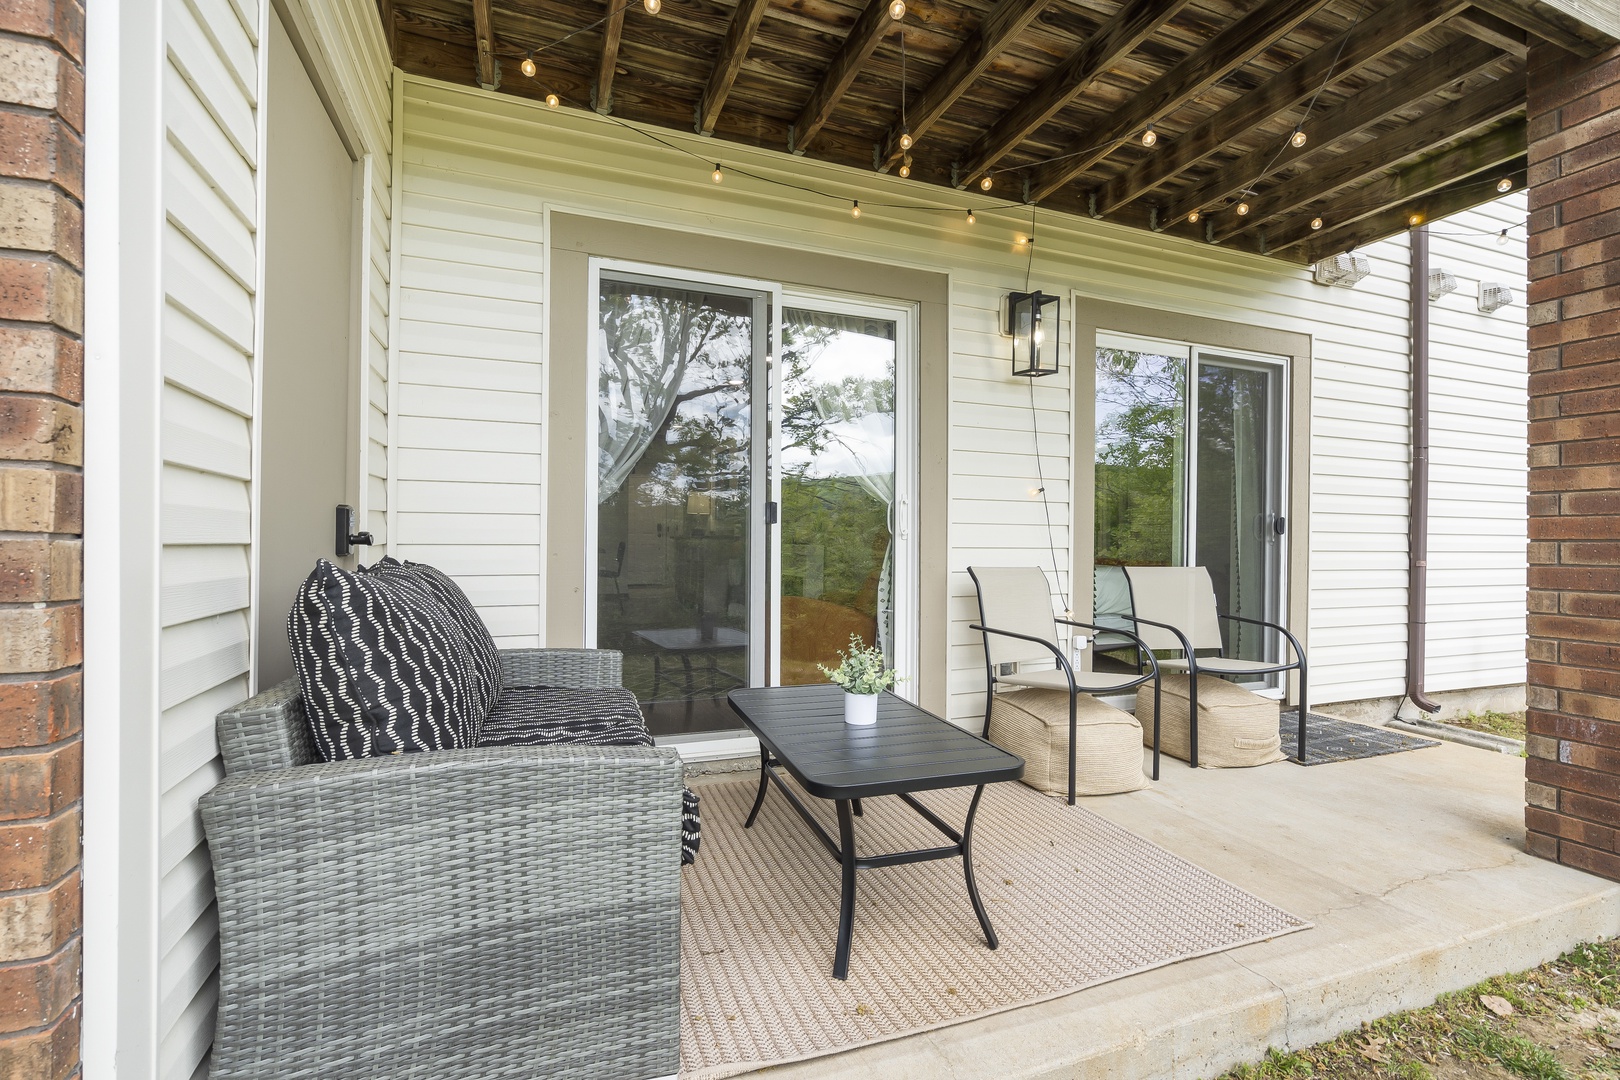 Unwind in the fresh air while soaking in the serene view from the patio